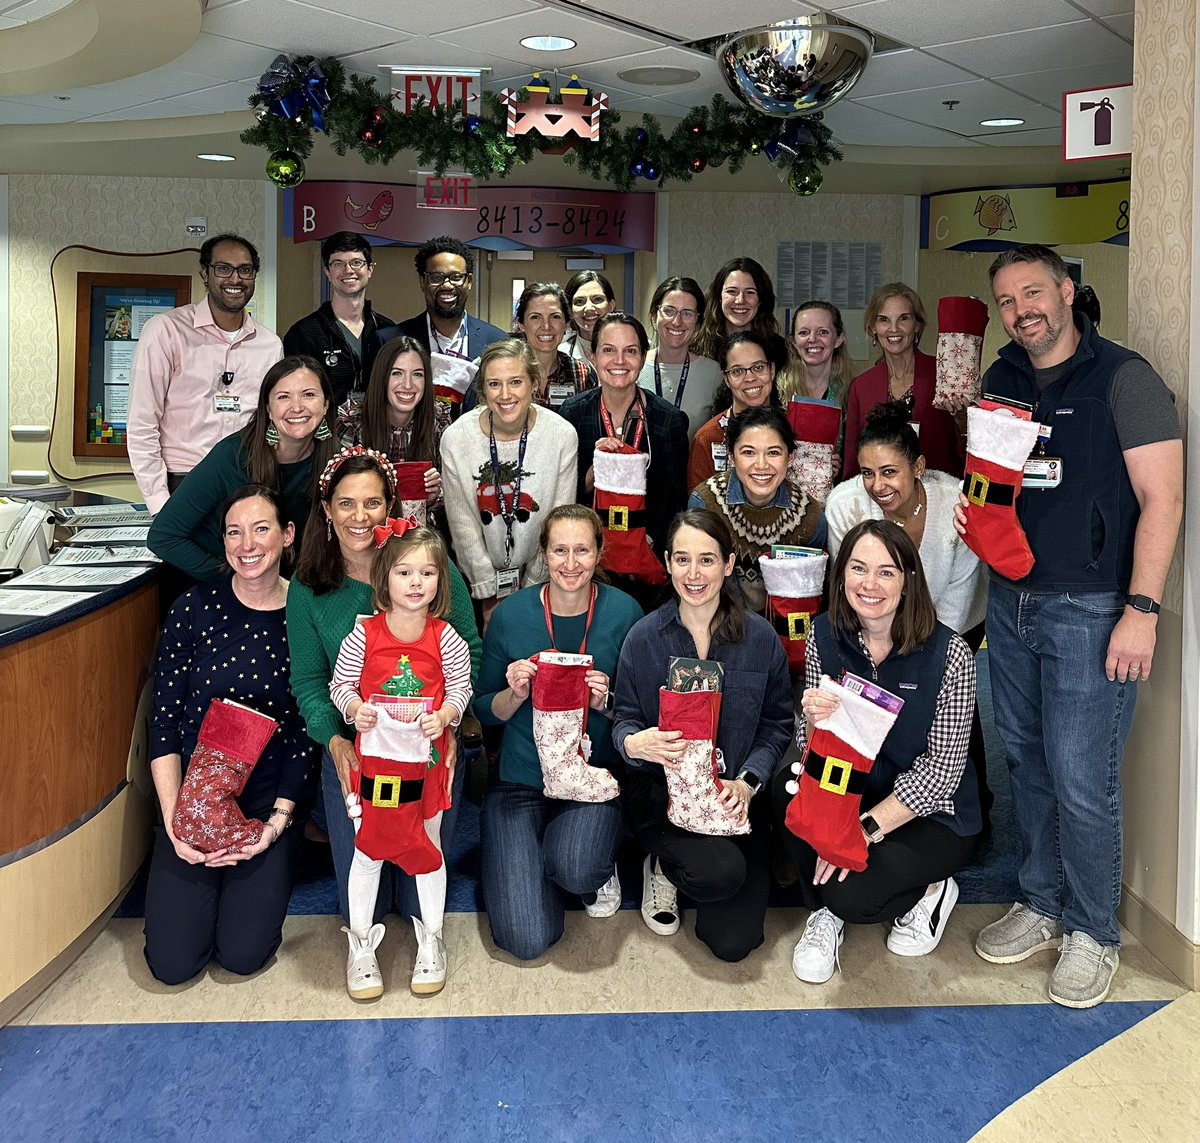 It’s our favorite time of year! @VUMCChildrenPHM stuffs stockings for our local Youth Villages every year. This year, we have 100 festive stockings heading to @youthvillages in Nashville! Kudos to Dr. Charlotte Brown for the original idea and organizing every year! 🎄🎅🤶🎄